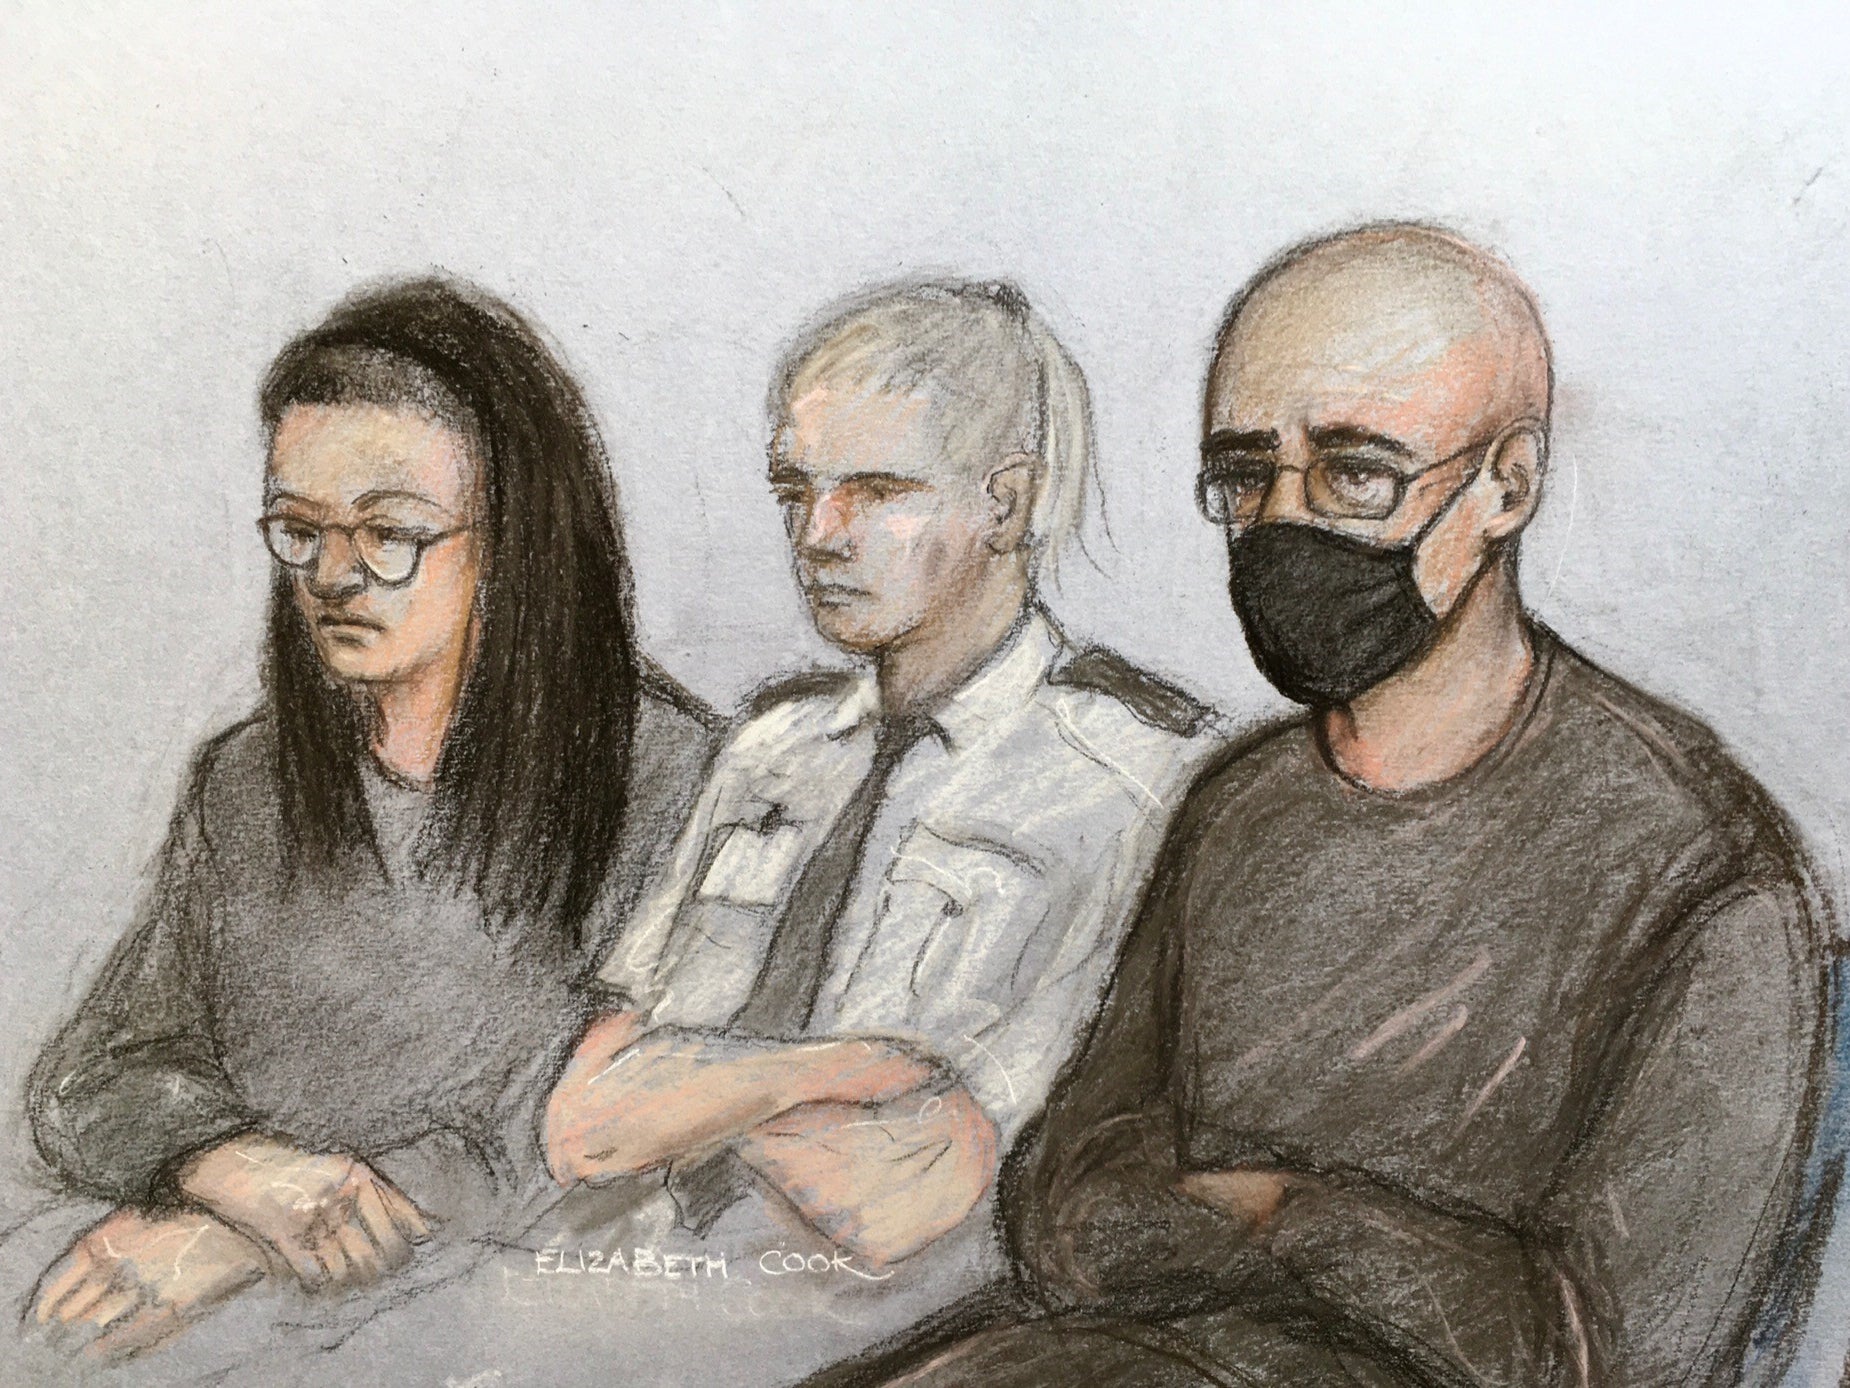 Court artist sketch of Angharad Williamson, 30, and her partner, John Cole, 40, in the dock at Cardiff Crown Court on 22 February 2022